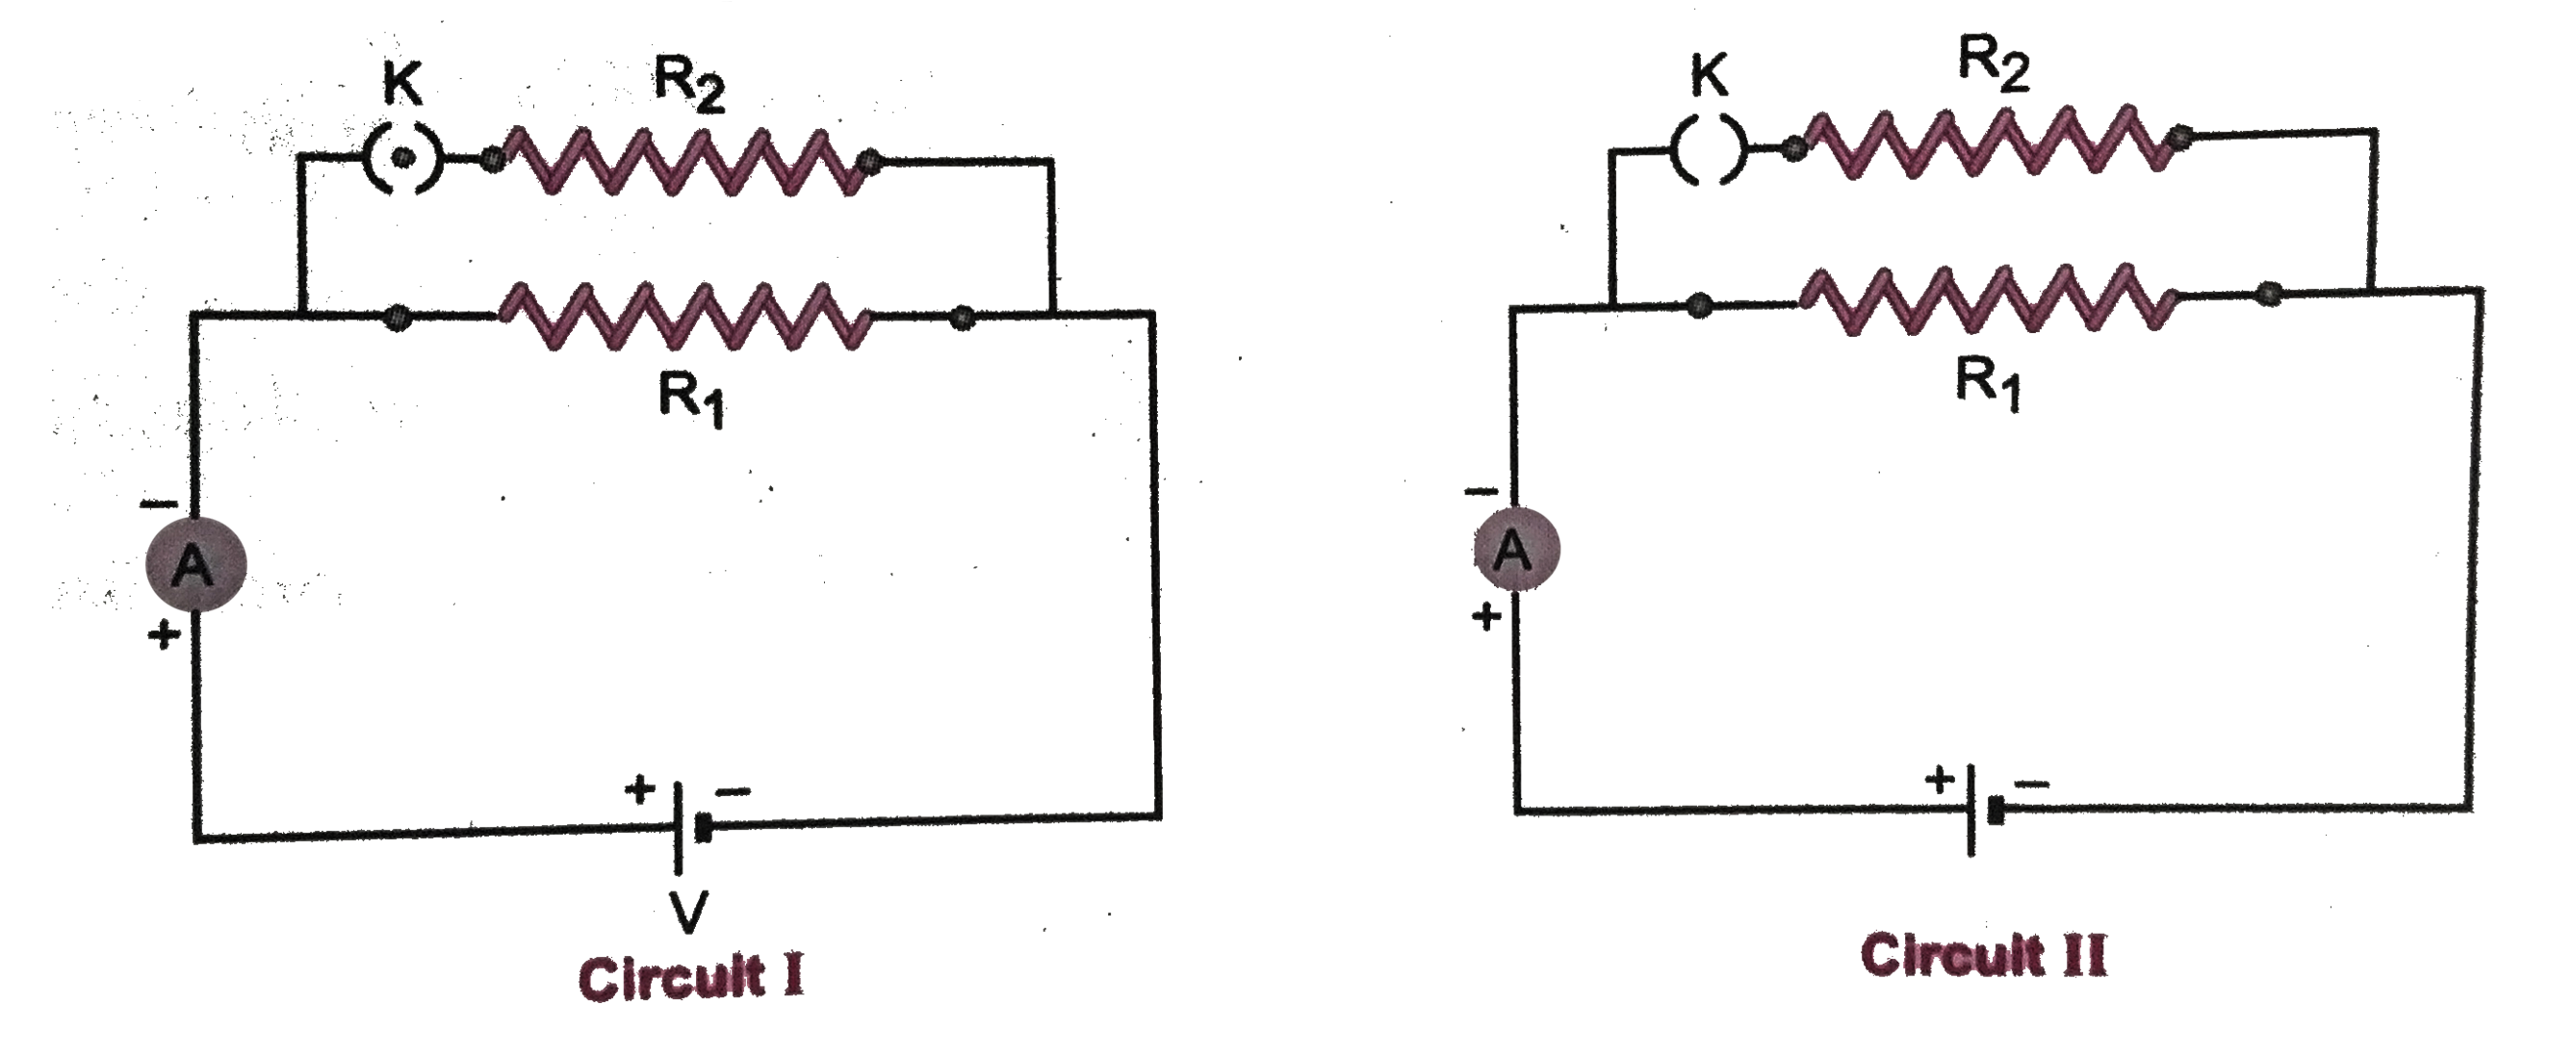 Two electric circuits I and II are shown in (Fig. 3.55). In circuit I, the key K is closed whereas in circuit II, the key is open. Compare the currents I and circuit II.   .